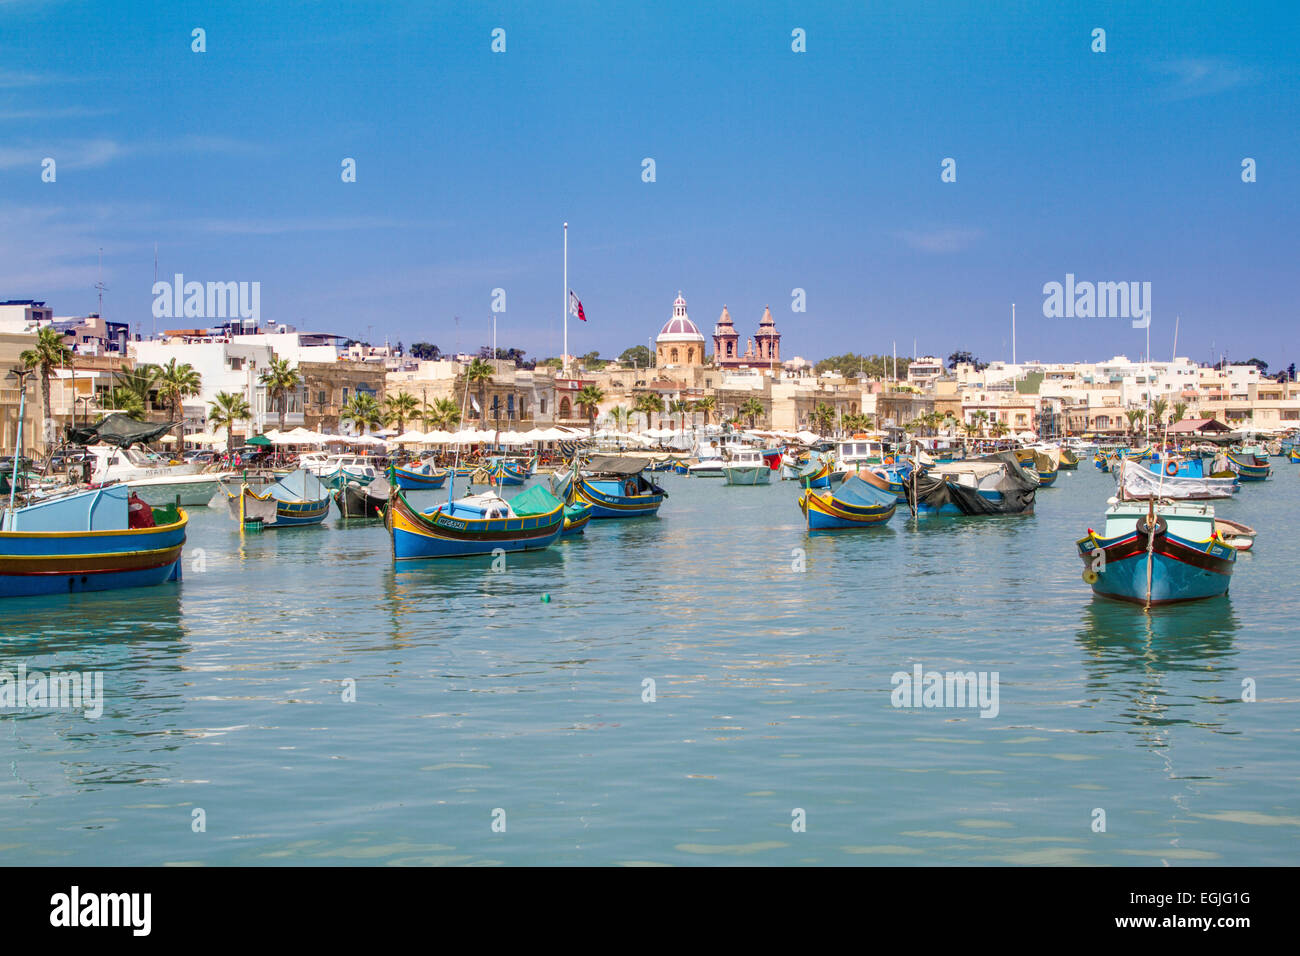 Picturesque landscape of numerous Luzzu traditional fishing boats in Marsaxlokk harbour, Malta Stock Photo